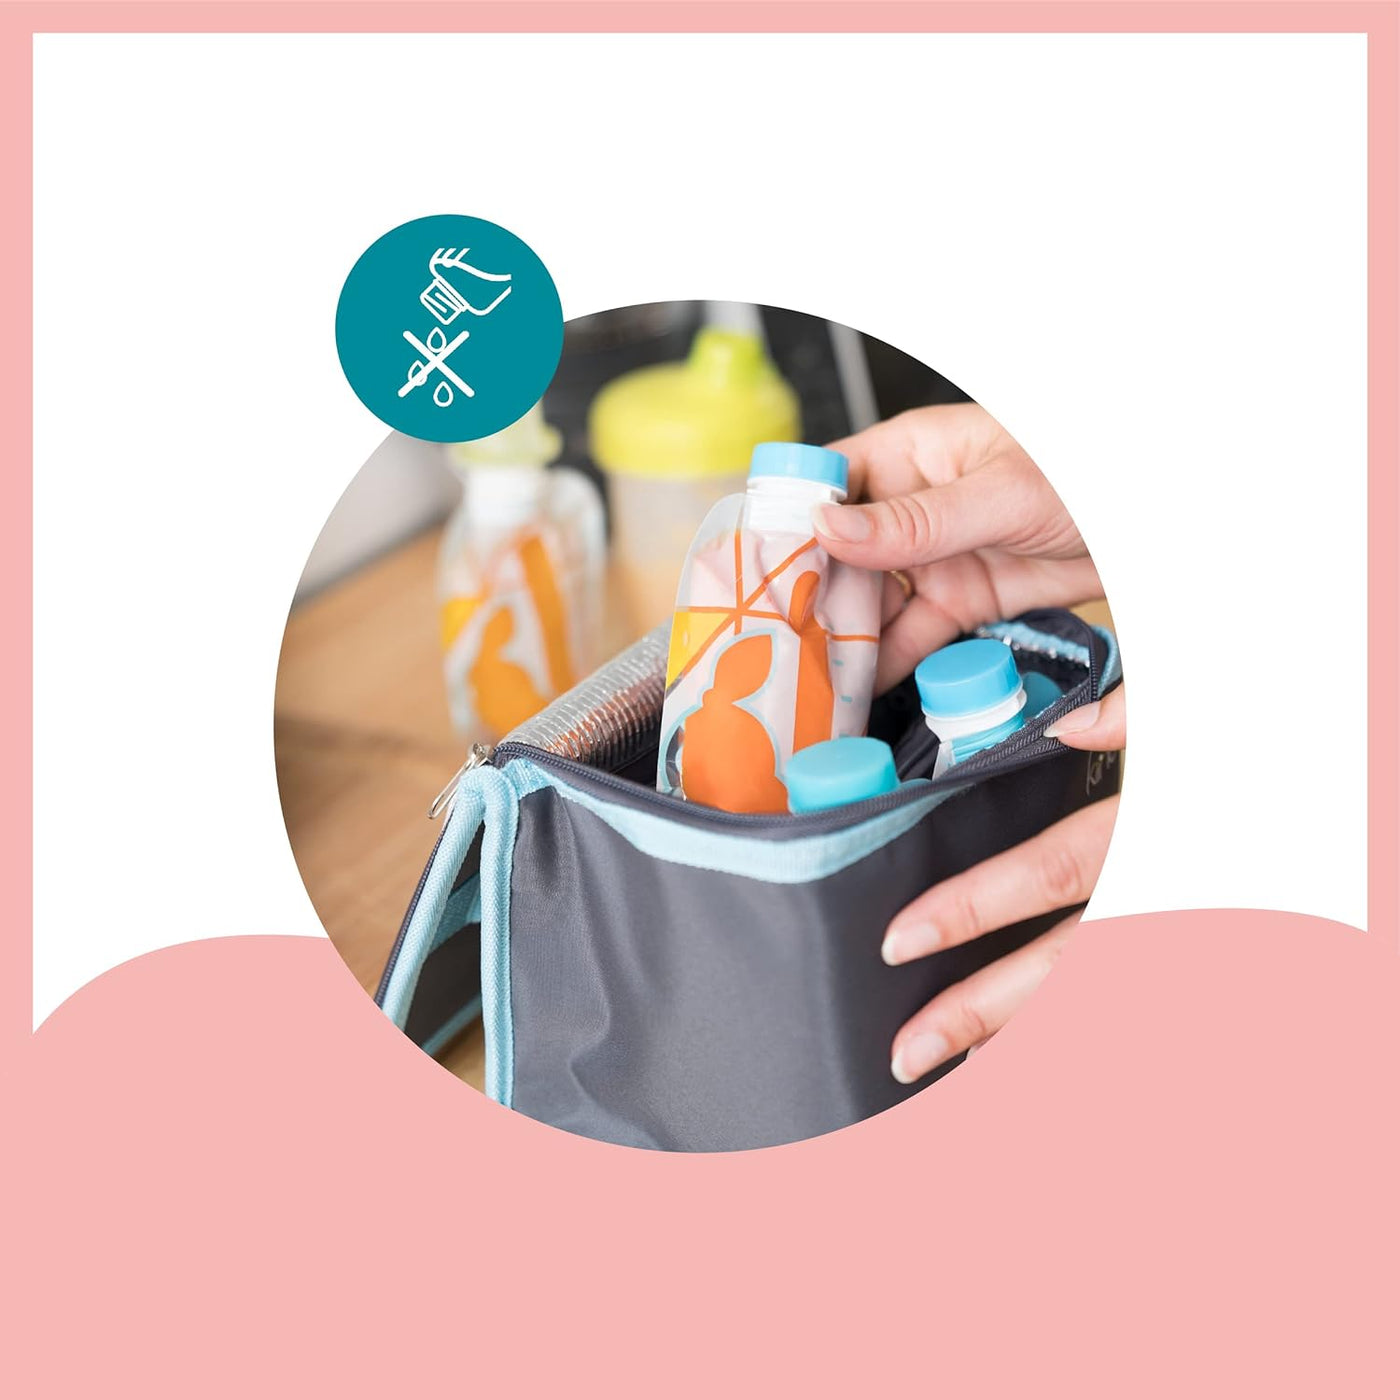 Earthlets| Babymoov Foodii baby food pouch making kit with reusable squeeze pouches | Earthlets.com |  